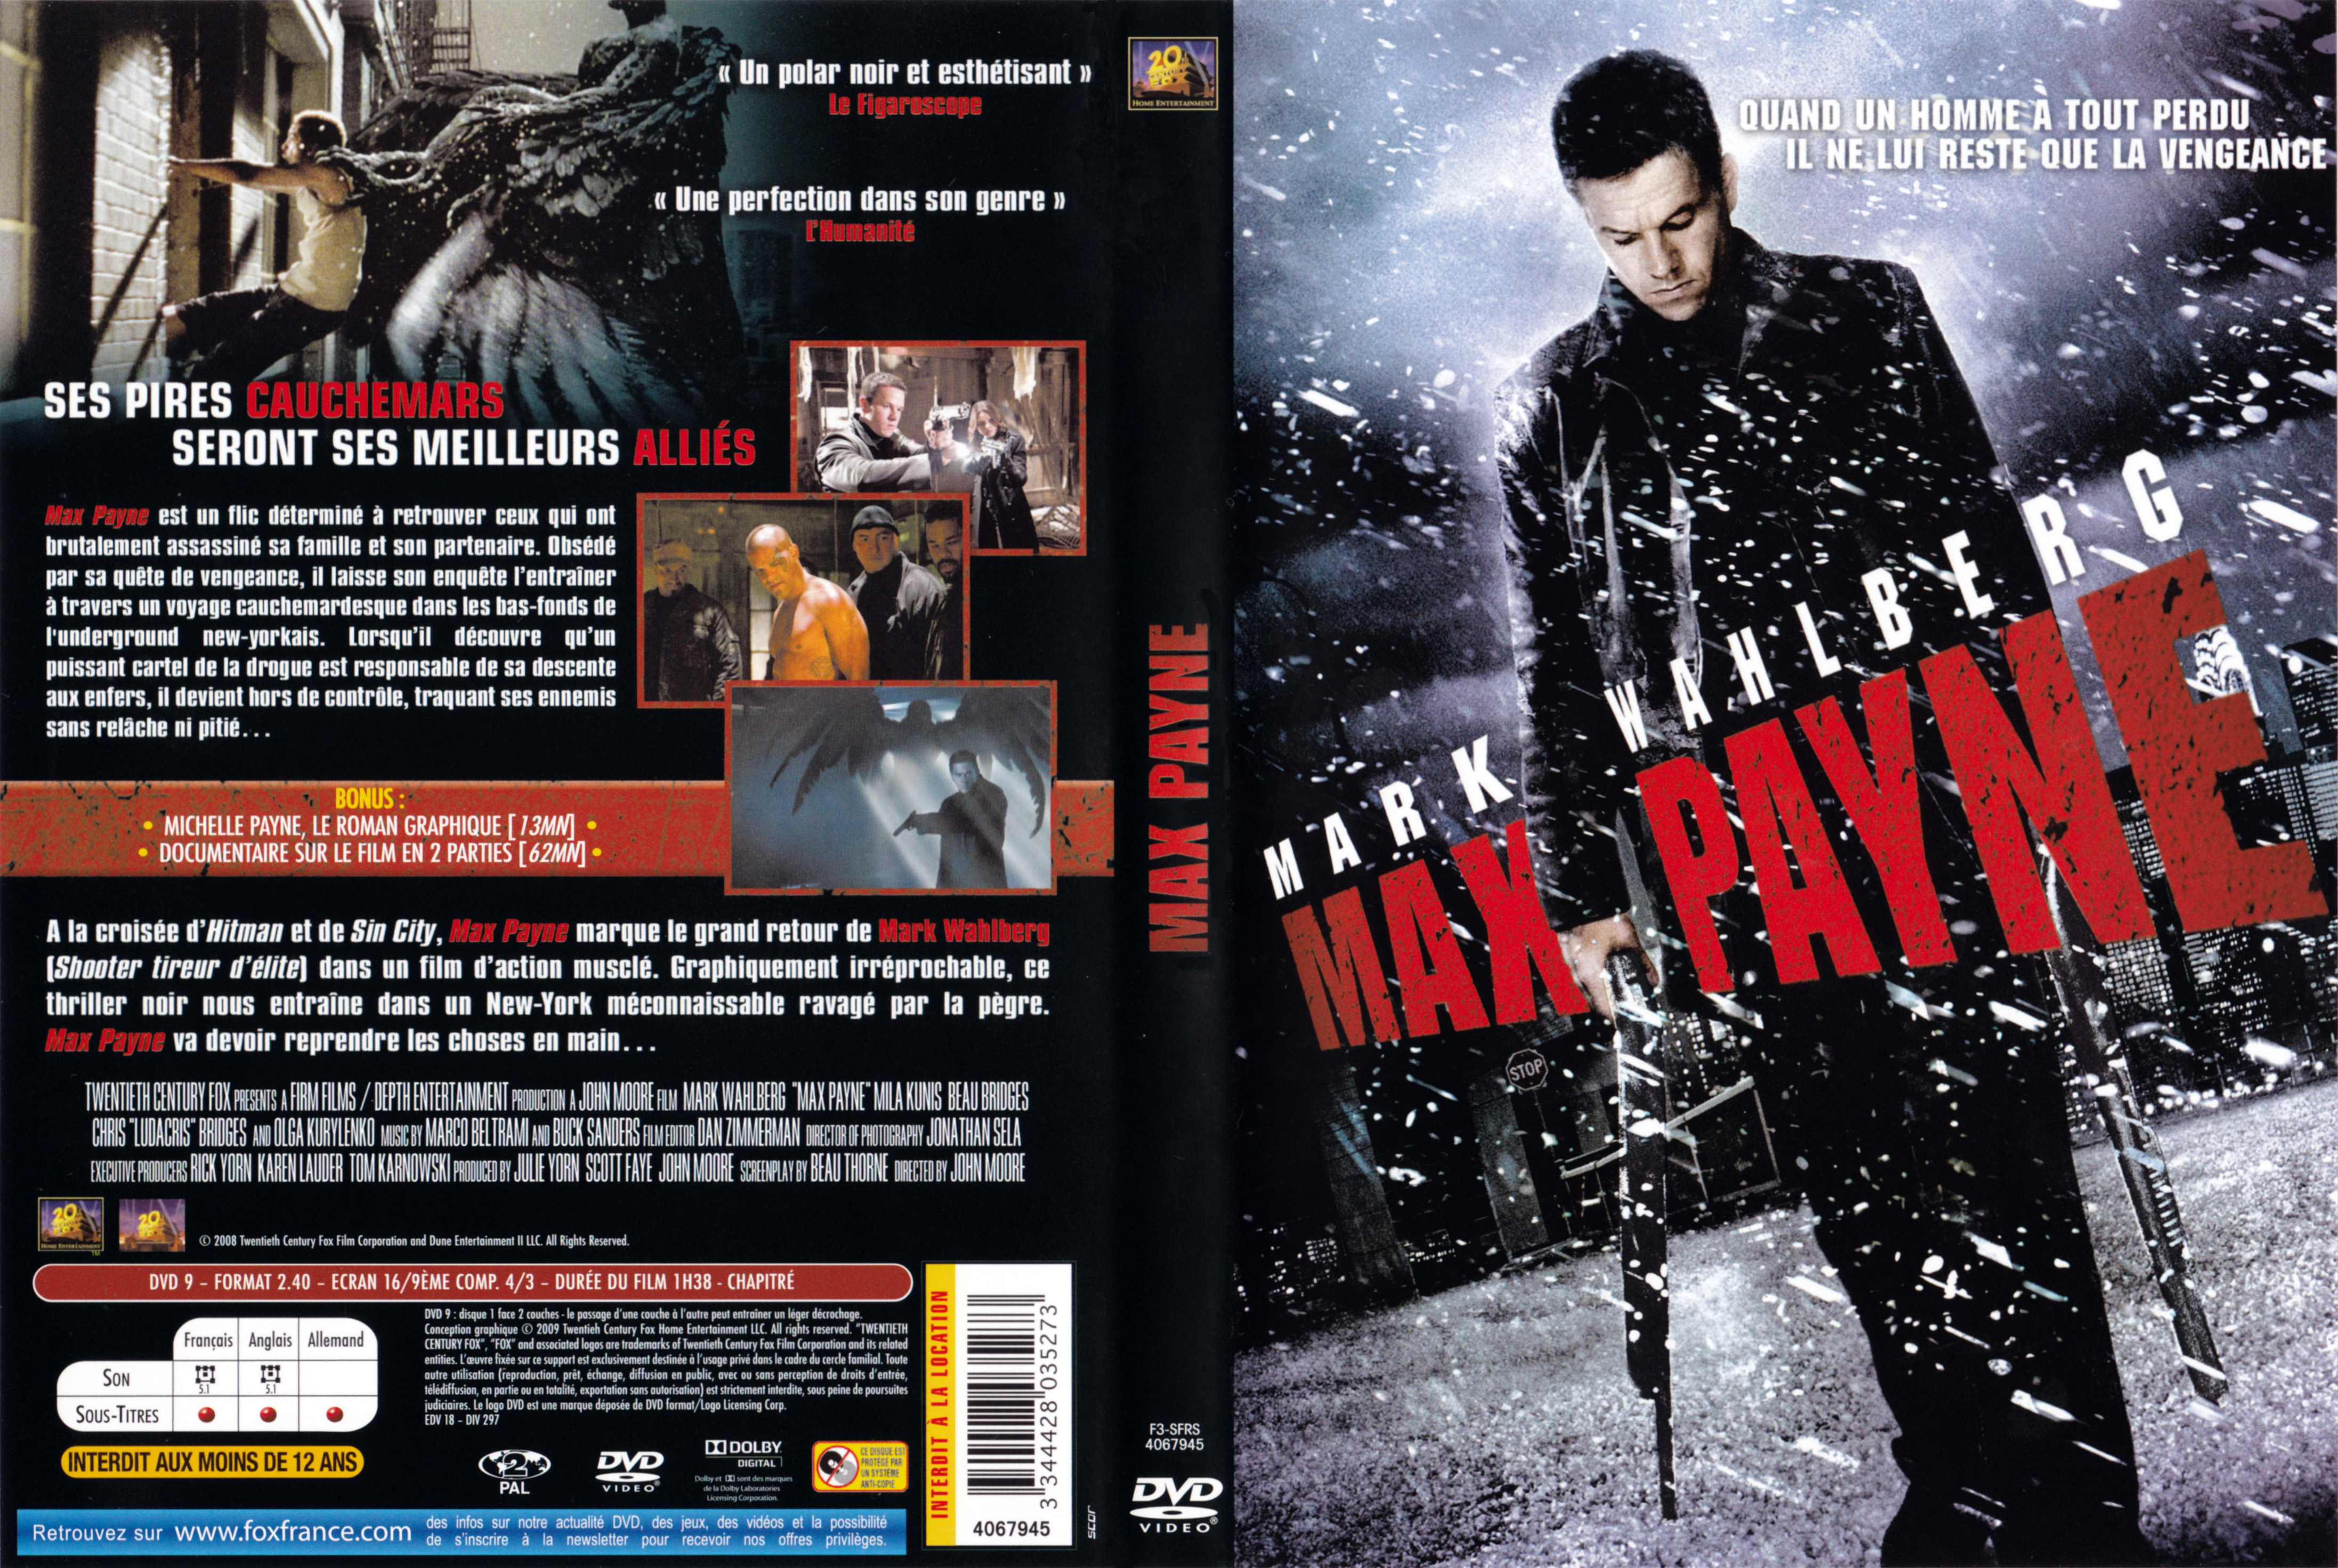 Jaquette DVD Max Payne